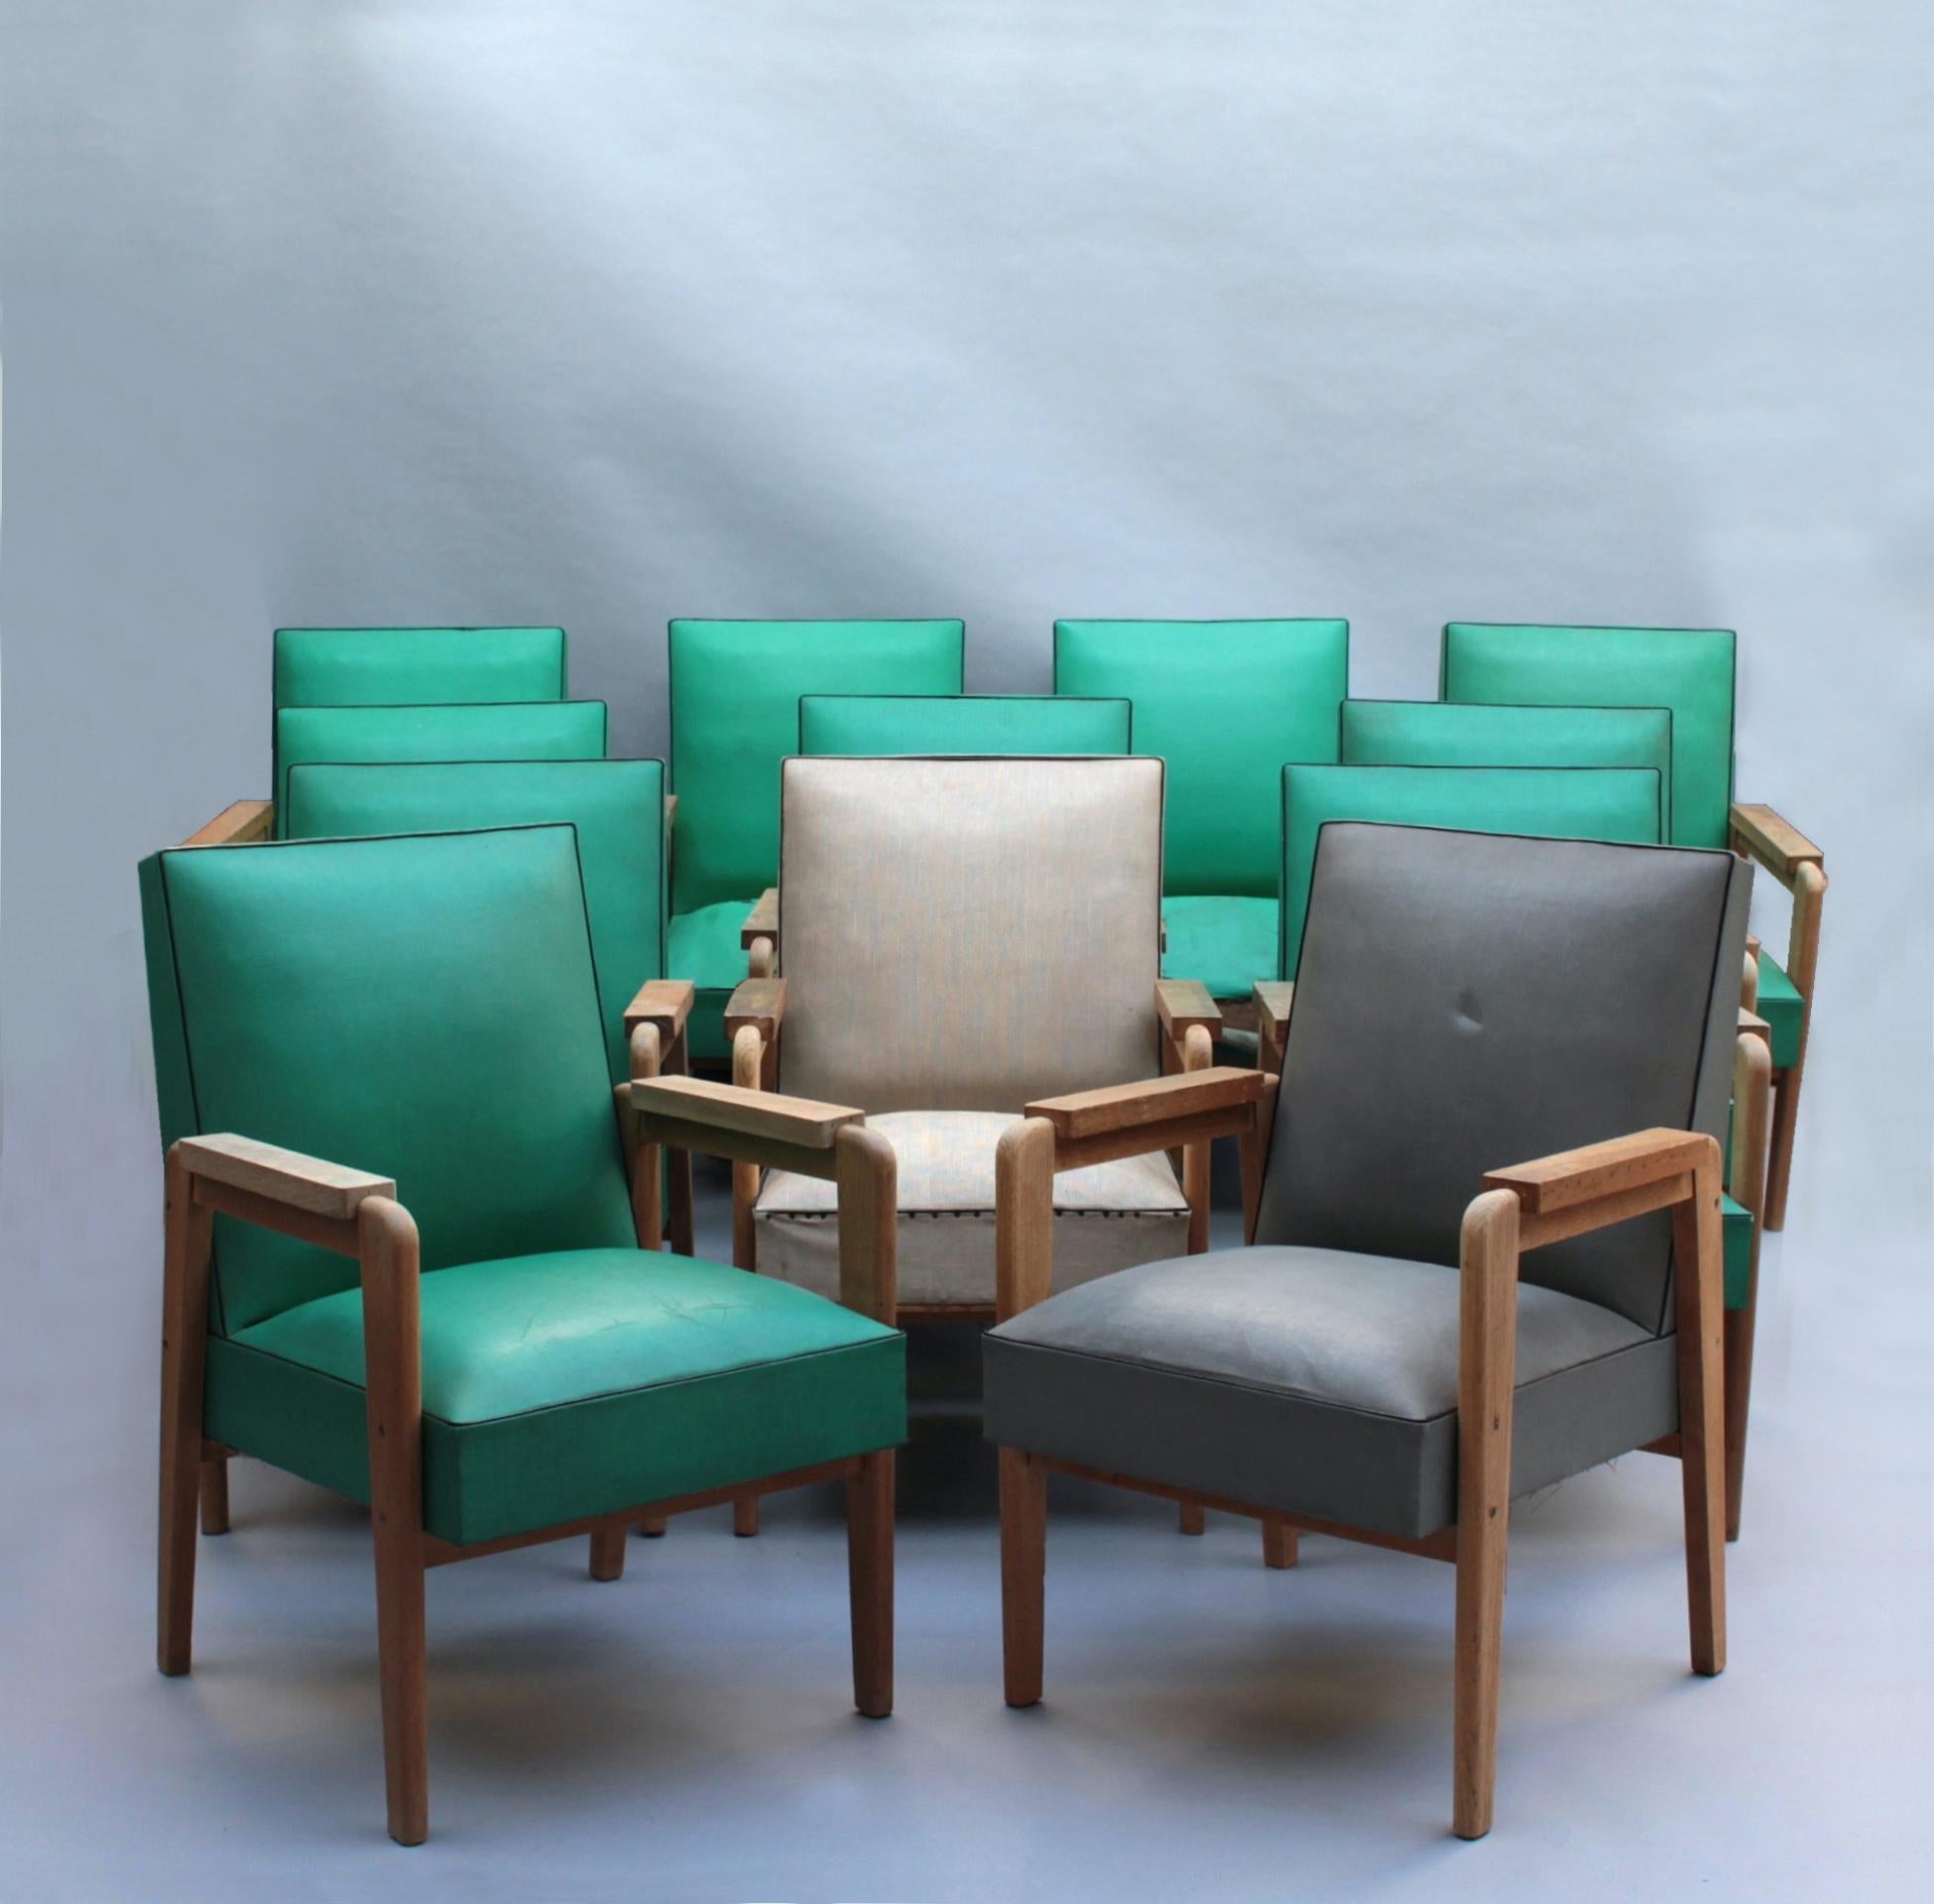 MARCEL GASCOIN (1907-1986) DESIGNER SICAM EDITEUR COLLECTION DU CROUS DE L'ACADEMIE DE VERSAILLES
A set of 12 fine French Mid-Century armchairs / dining chairs in solid oak.
Provenance: These chairs furnished the 'Residence Universitaire' (student